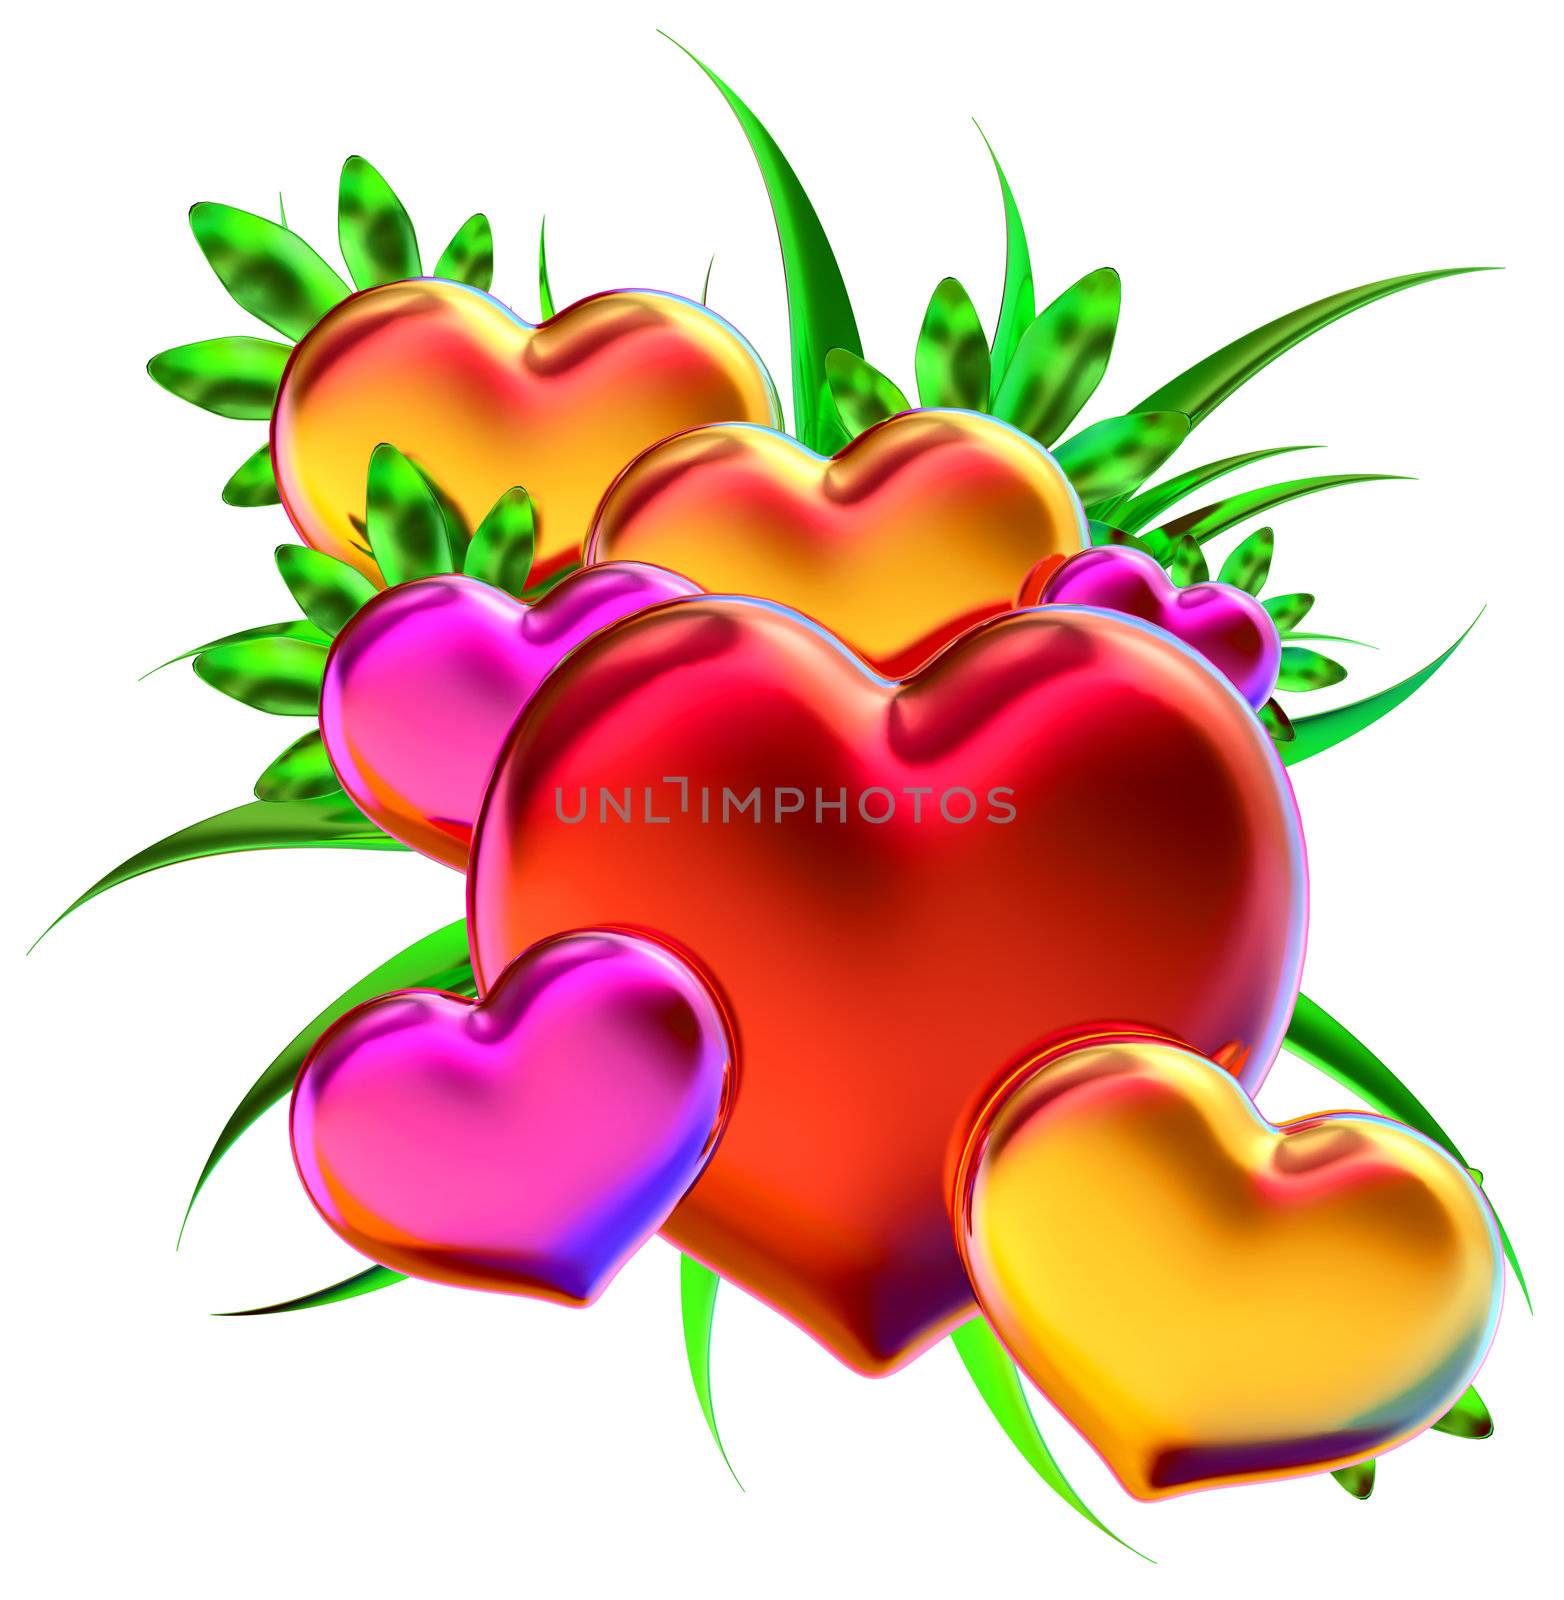 Set of hearts in floral style with green leaves on white background for Valentine's Day